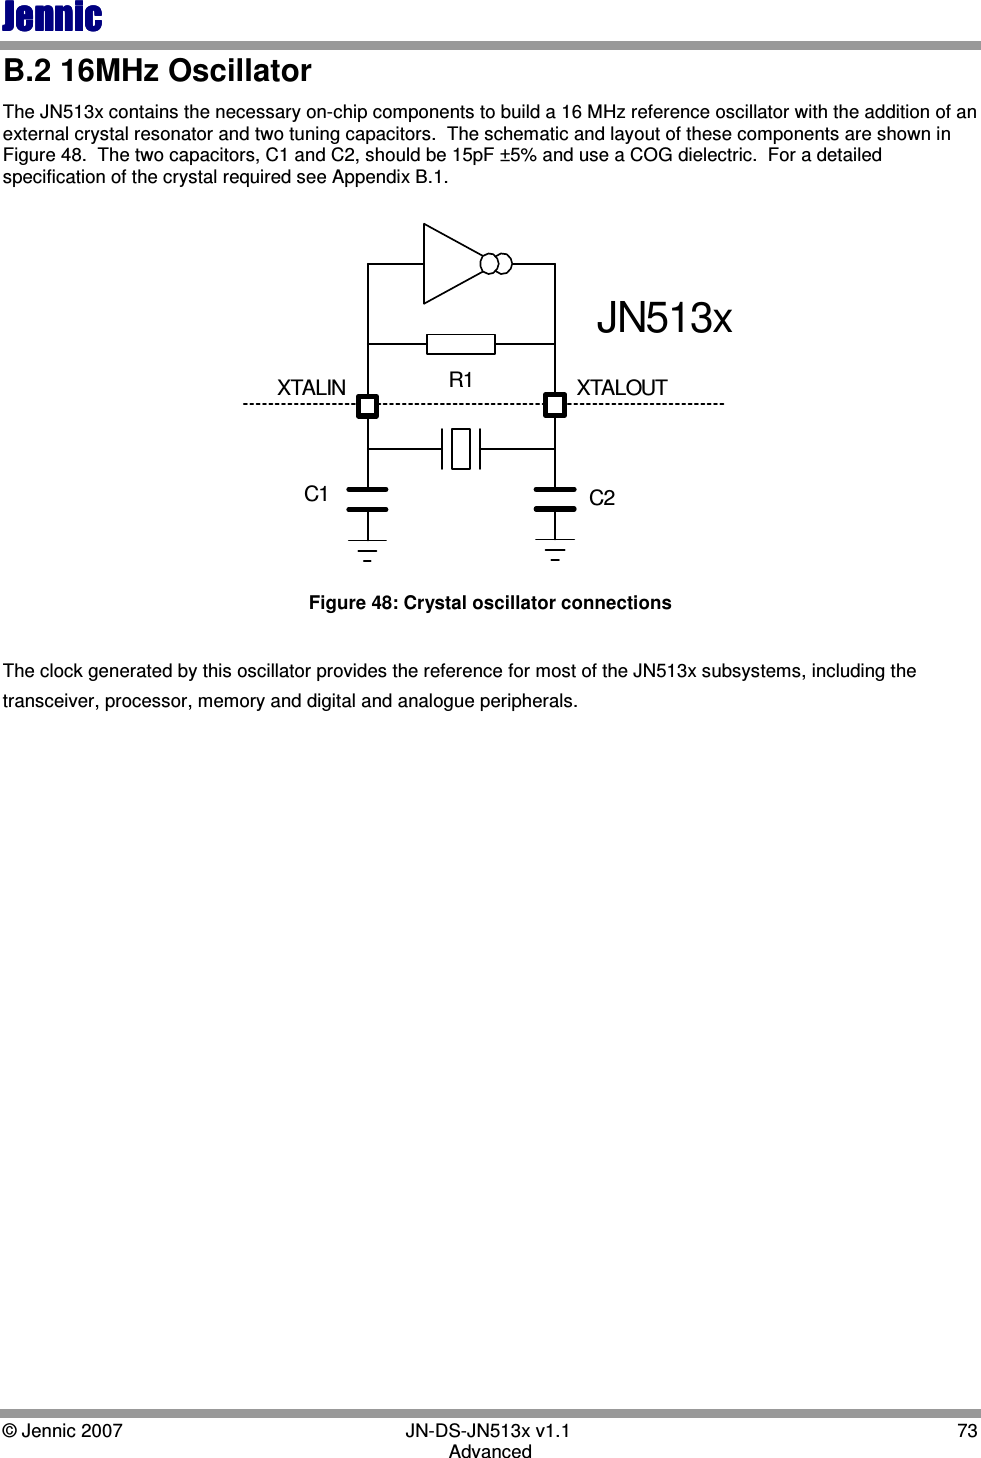 JennicJennicJennicJennic    © Jennic 2007        JN-DS-JN513x v1.1  73 Advanced B.2 16MHz Oscillator The JN513x contains the necessary on-chip components to build a 16 MHz reference oscillator with the addition of an external crystal resonator and two tuning capacitors.  The schematic and layout of these components are shown in Figure 48.  The two capacitors, C1 and C2, should be 15pF ±5% and use a COG dielectric.  For a detailed specification of the crystal required see Appendix B.1. XTALOUTC2C1R1XTALINJN513x Figure 48: Crystal oscillator connections  The clock generated by this oscillator provides the reference for most of the JN513x subsystems, including the transceiver, processor, memory and digital and analogue peripherals.   